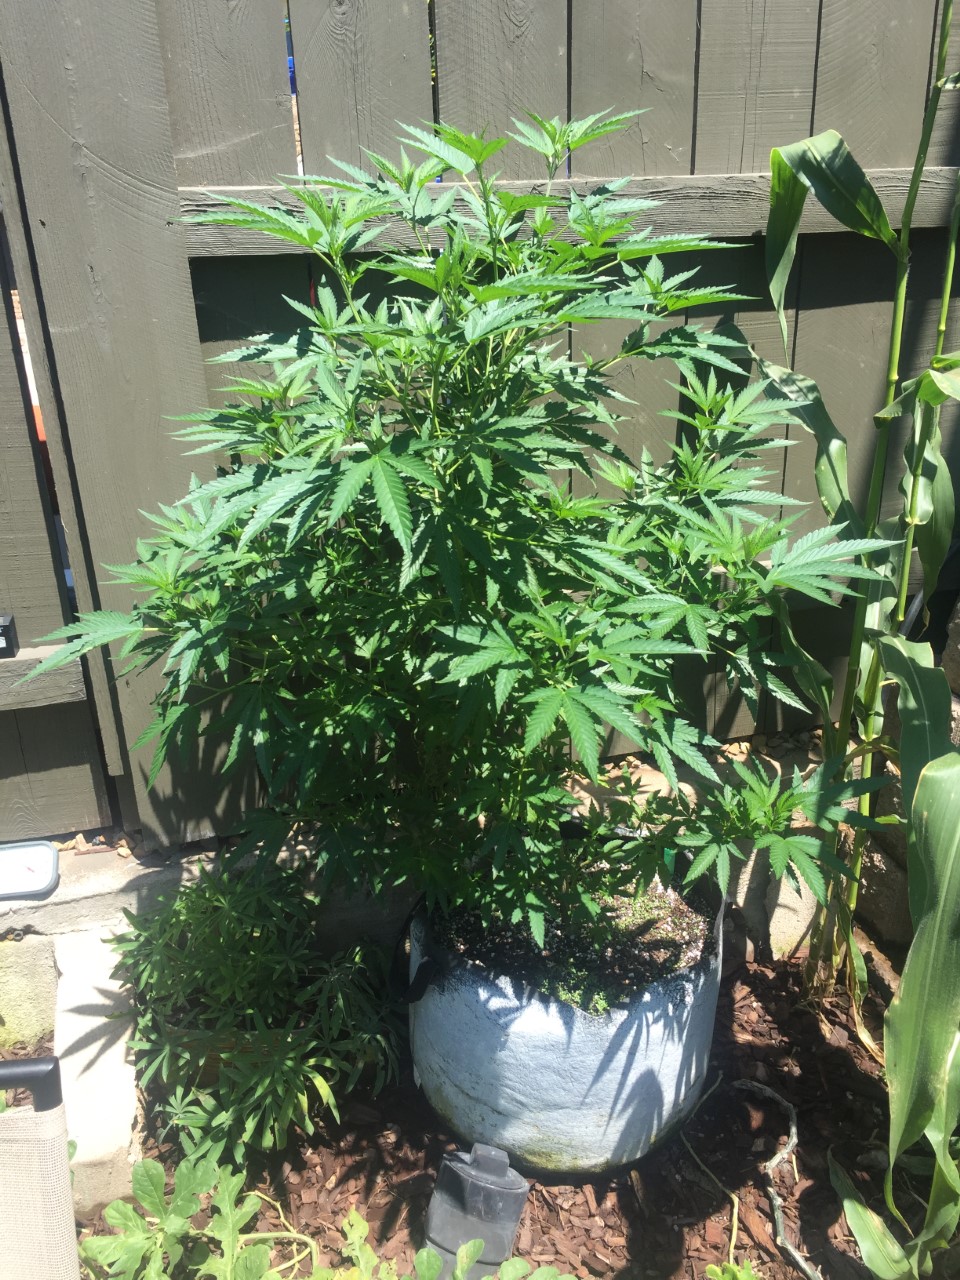 White Widow Outdoor August 5th, 2017